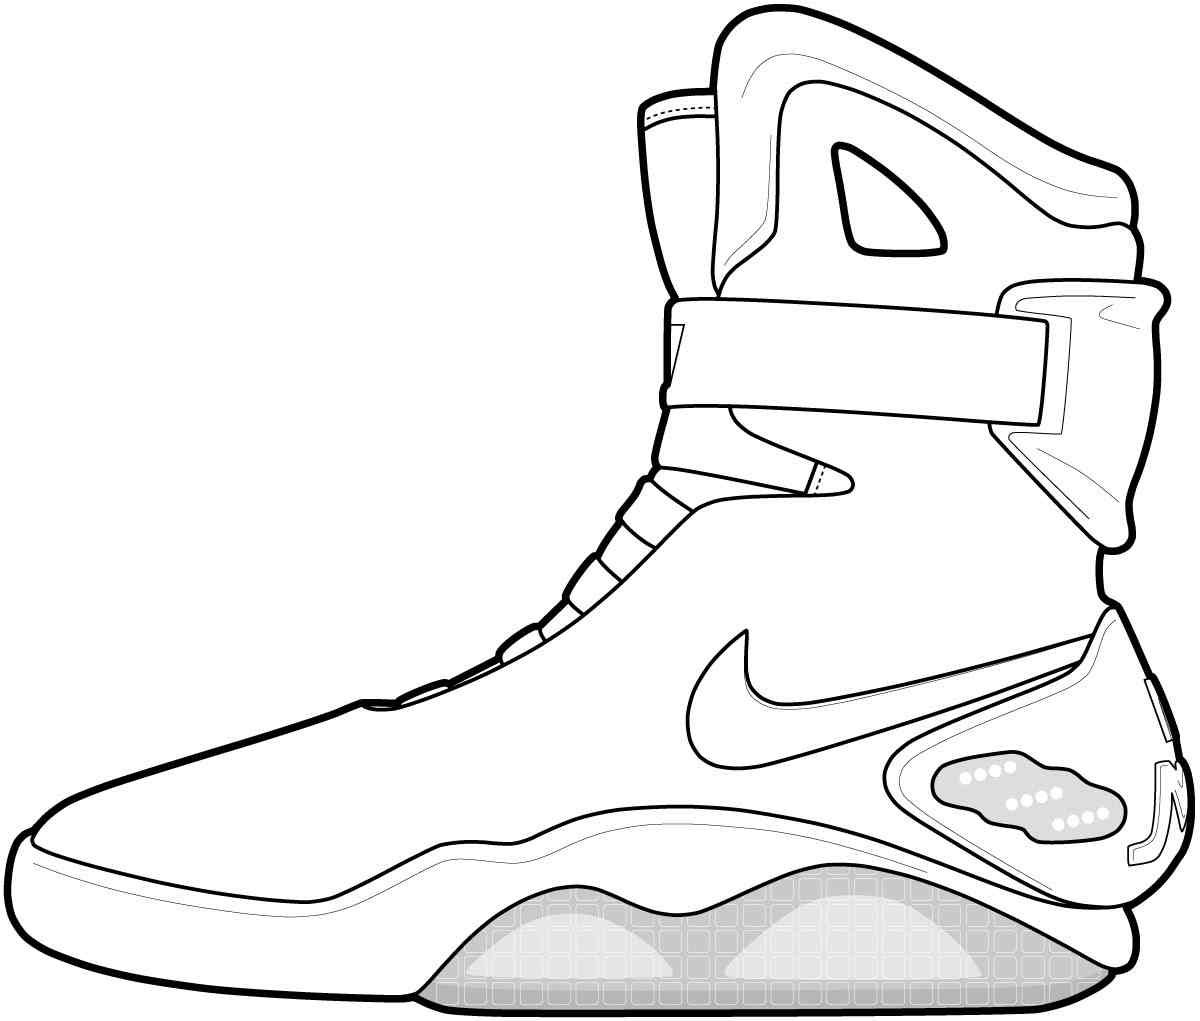 Cool Nike Shoes 1 Coloring Page